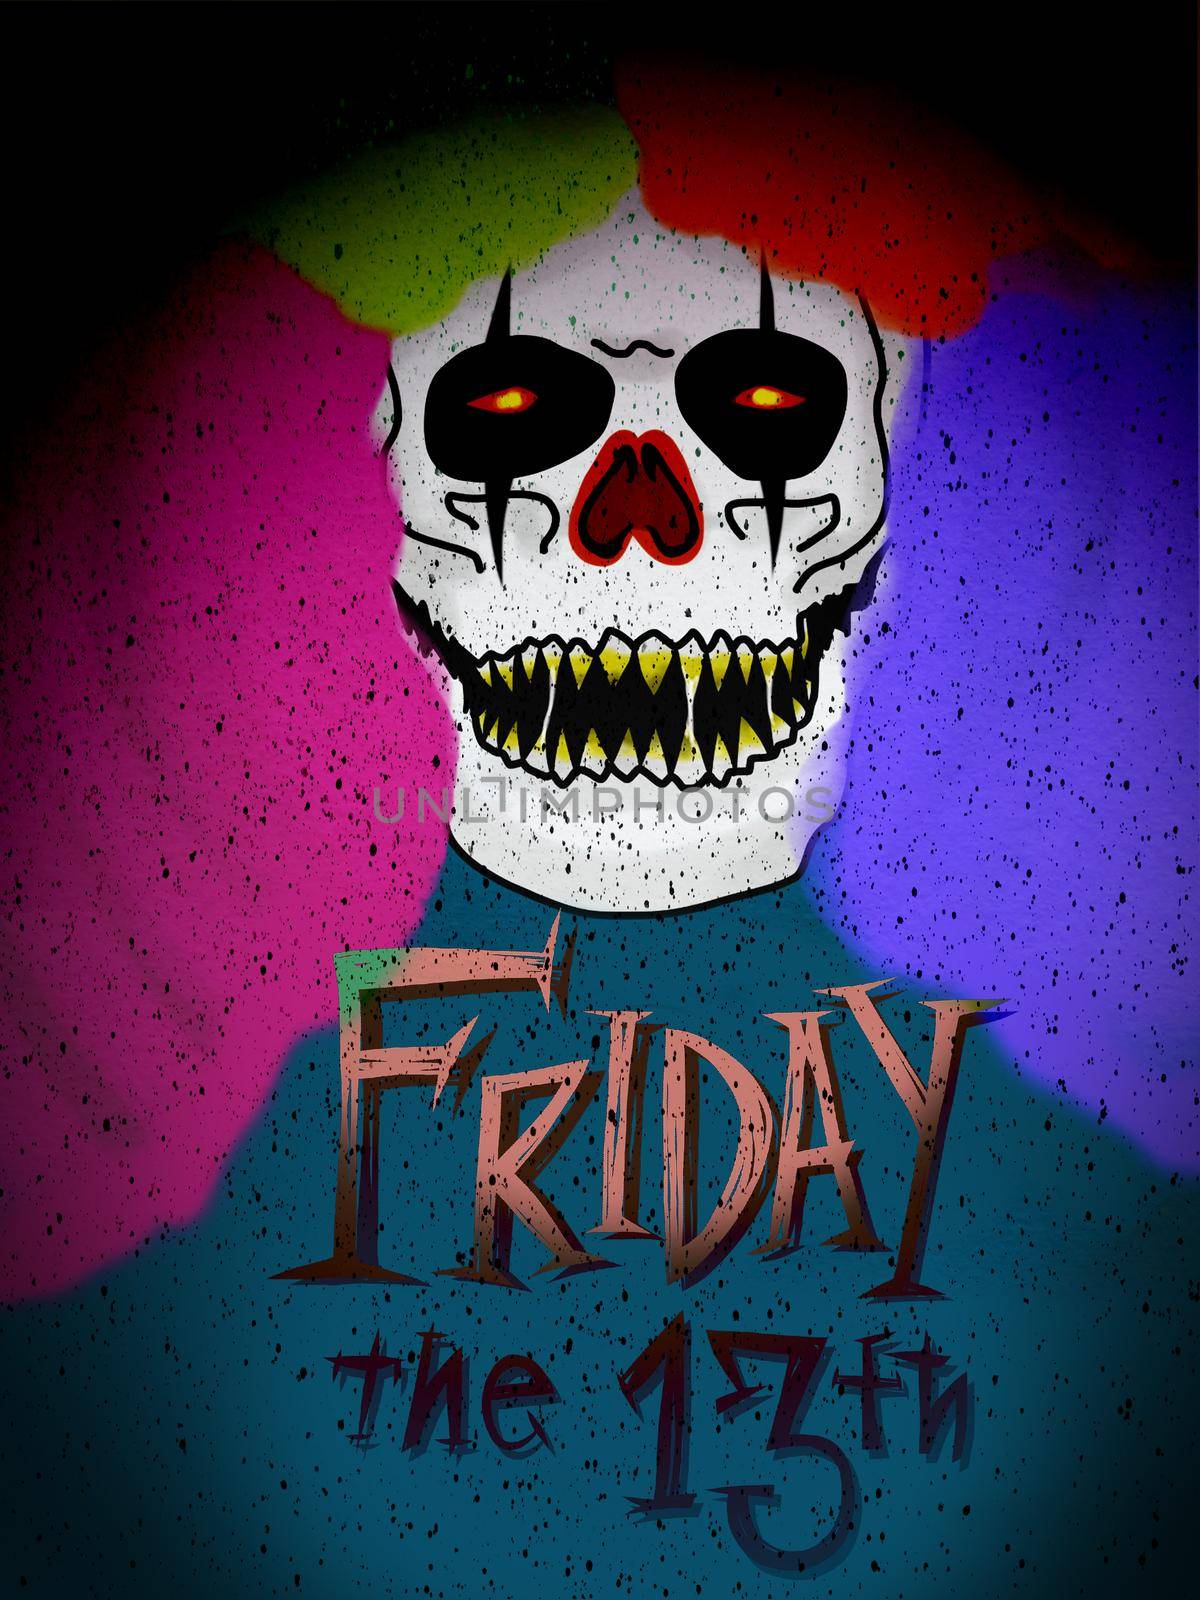 Monster clown Friday 13th painting illustration by Yoopho